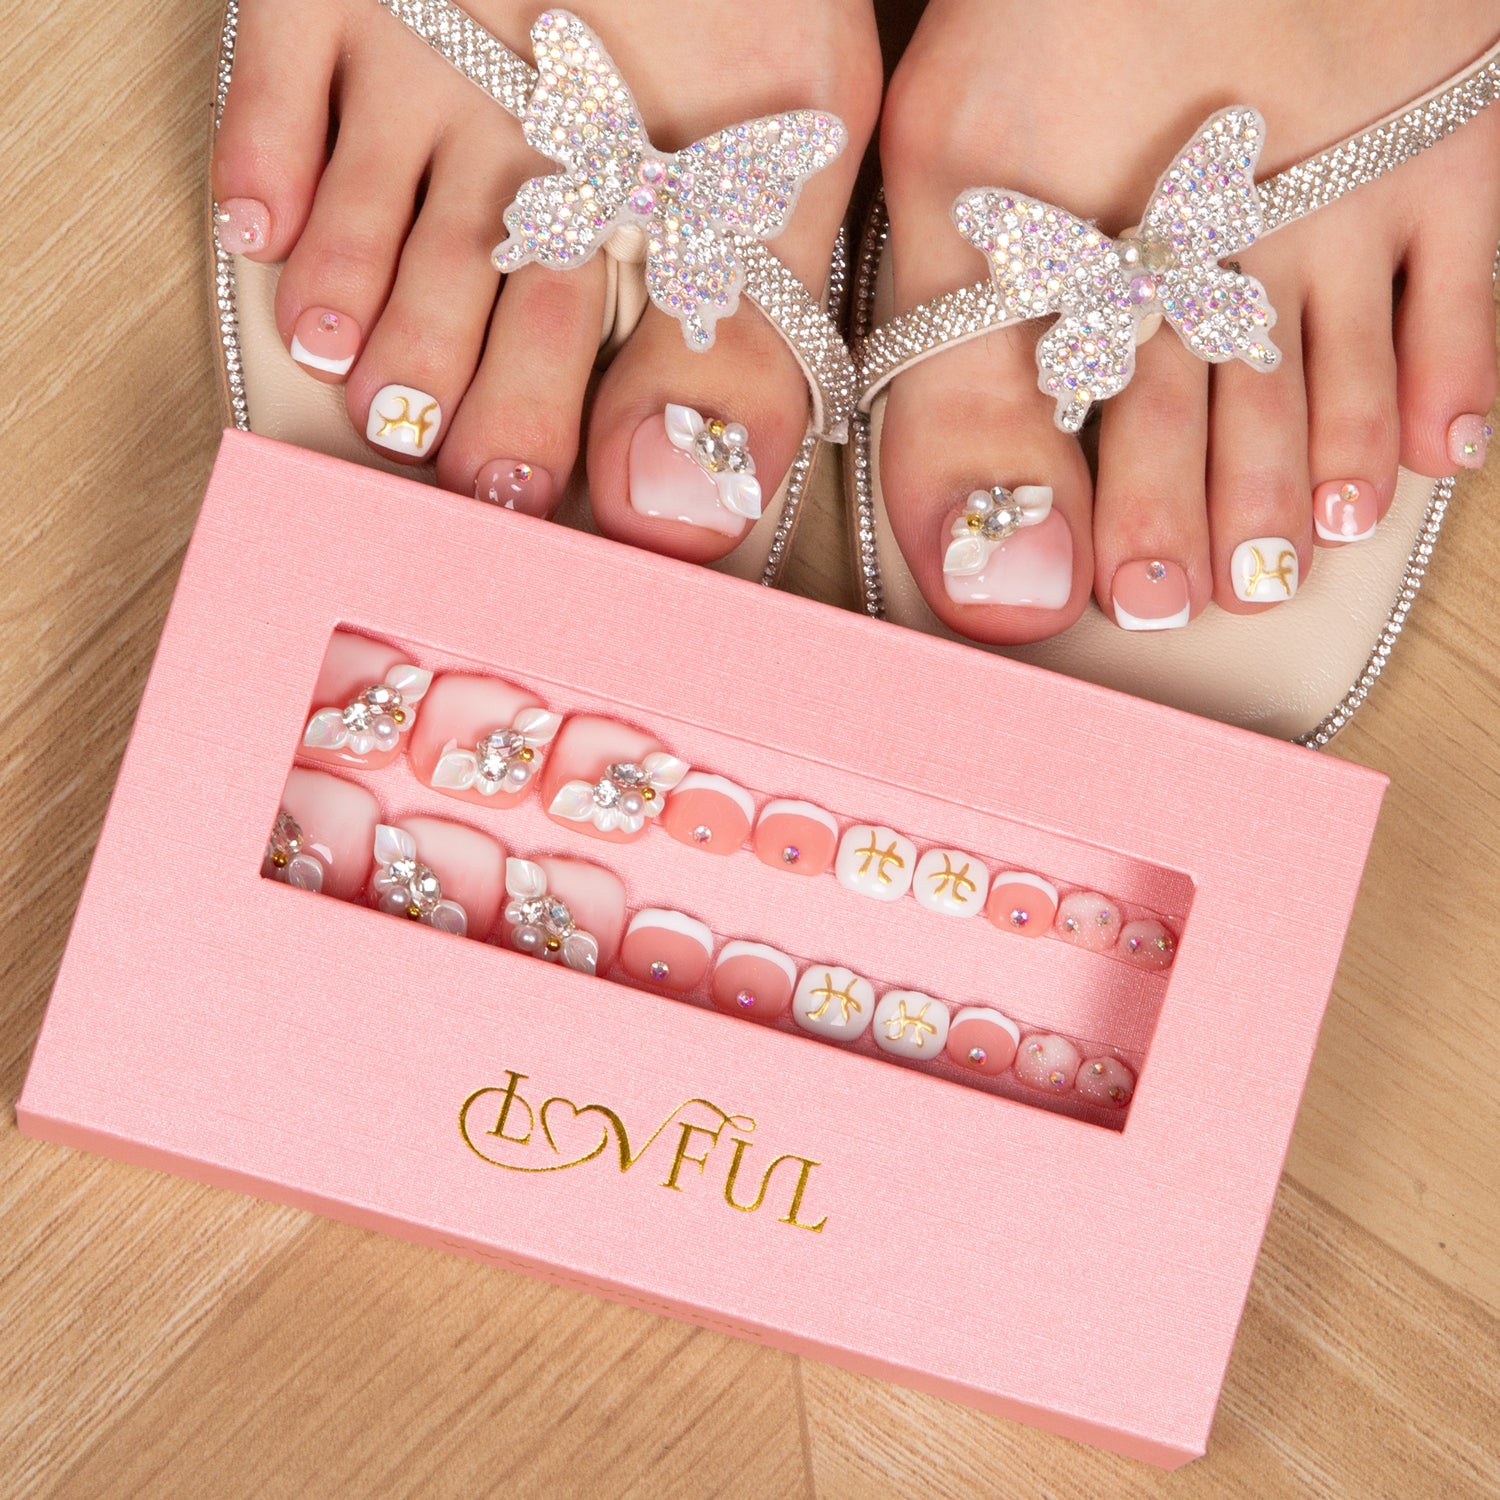 T97 - Only You - 20 Pcs FREE SIZE Toe Nails